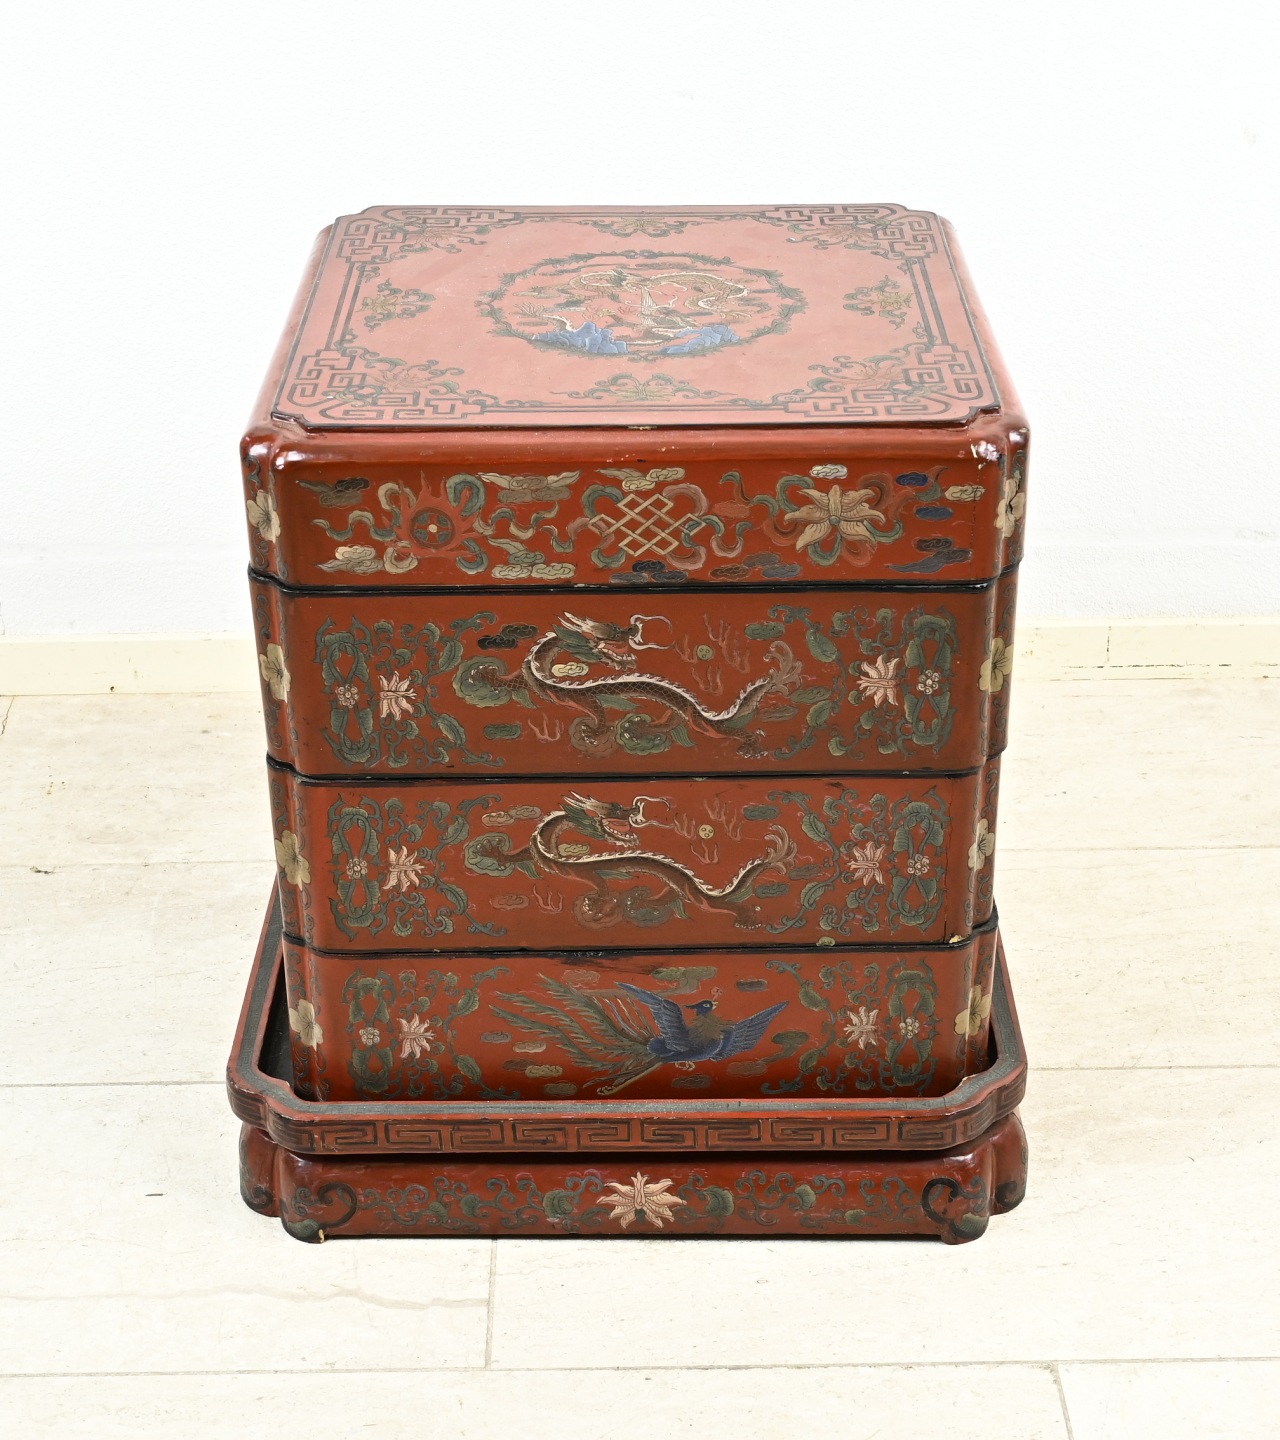 Piece of furniture, red box (Chinese)